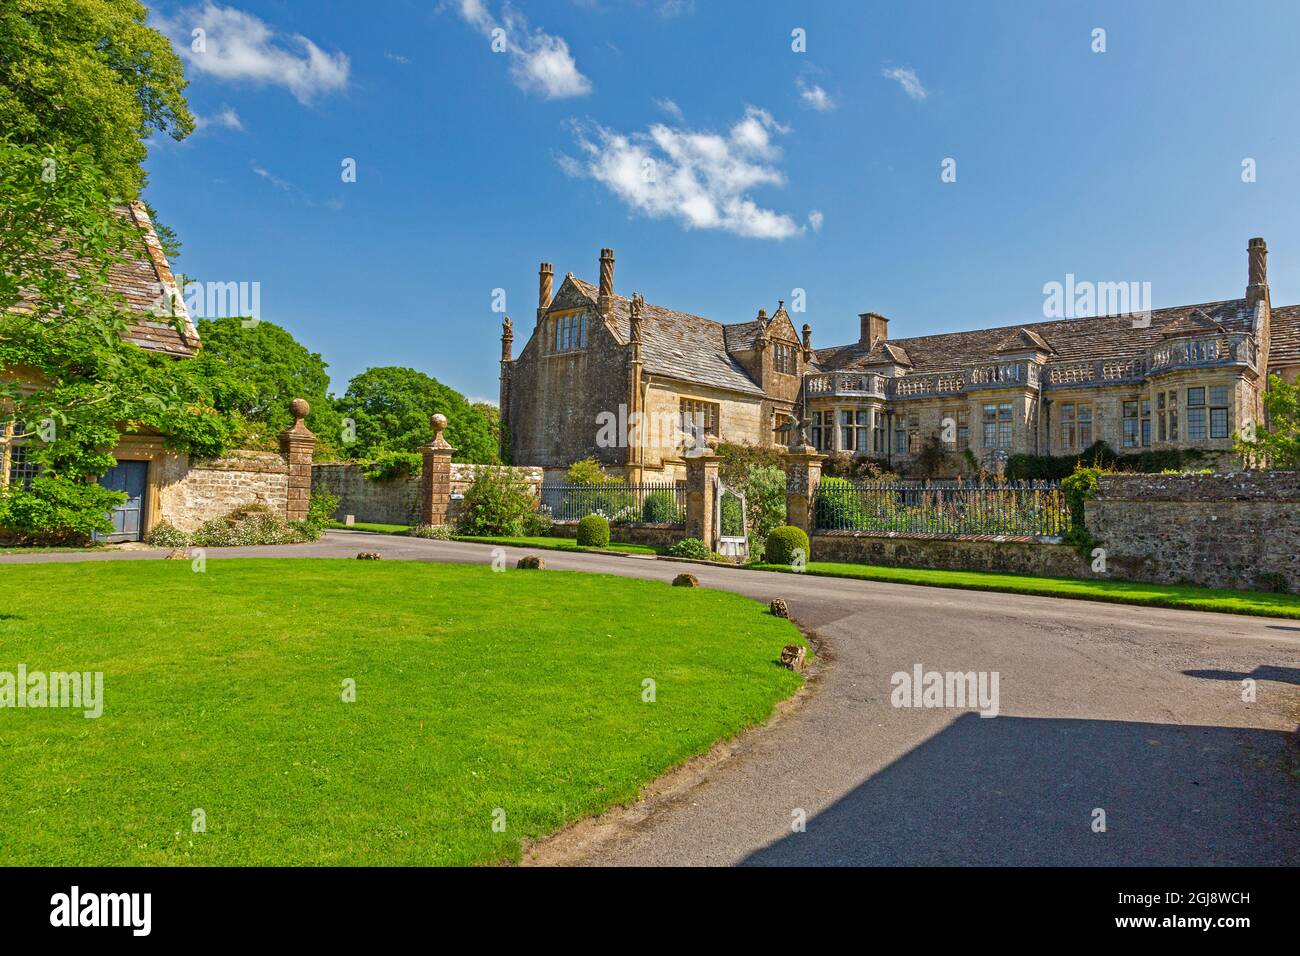 The west front of Mapperton House - a Jacobean country manor house and home to the Earl of Sandwich near Beaminster, Dorset, England, UK Stock Photo